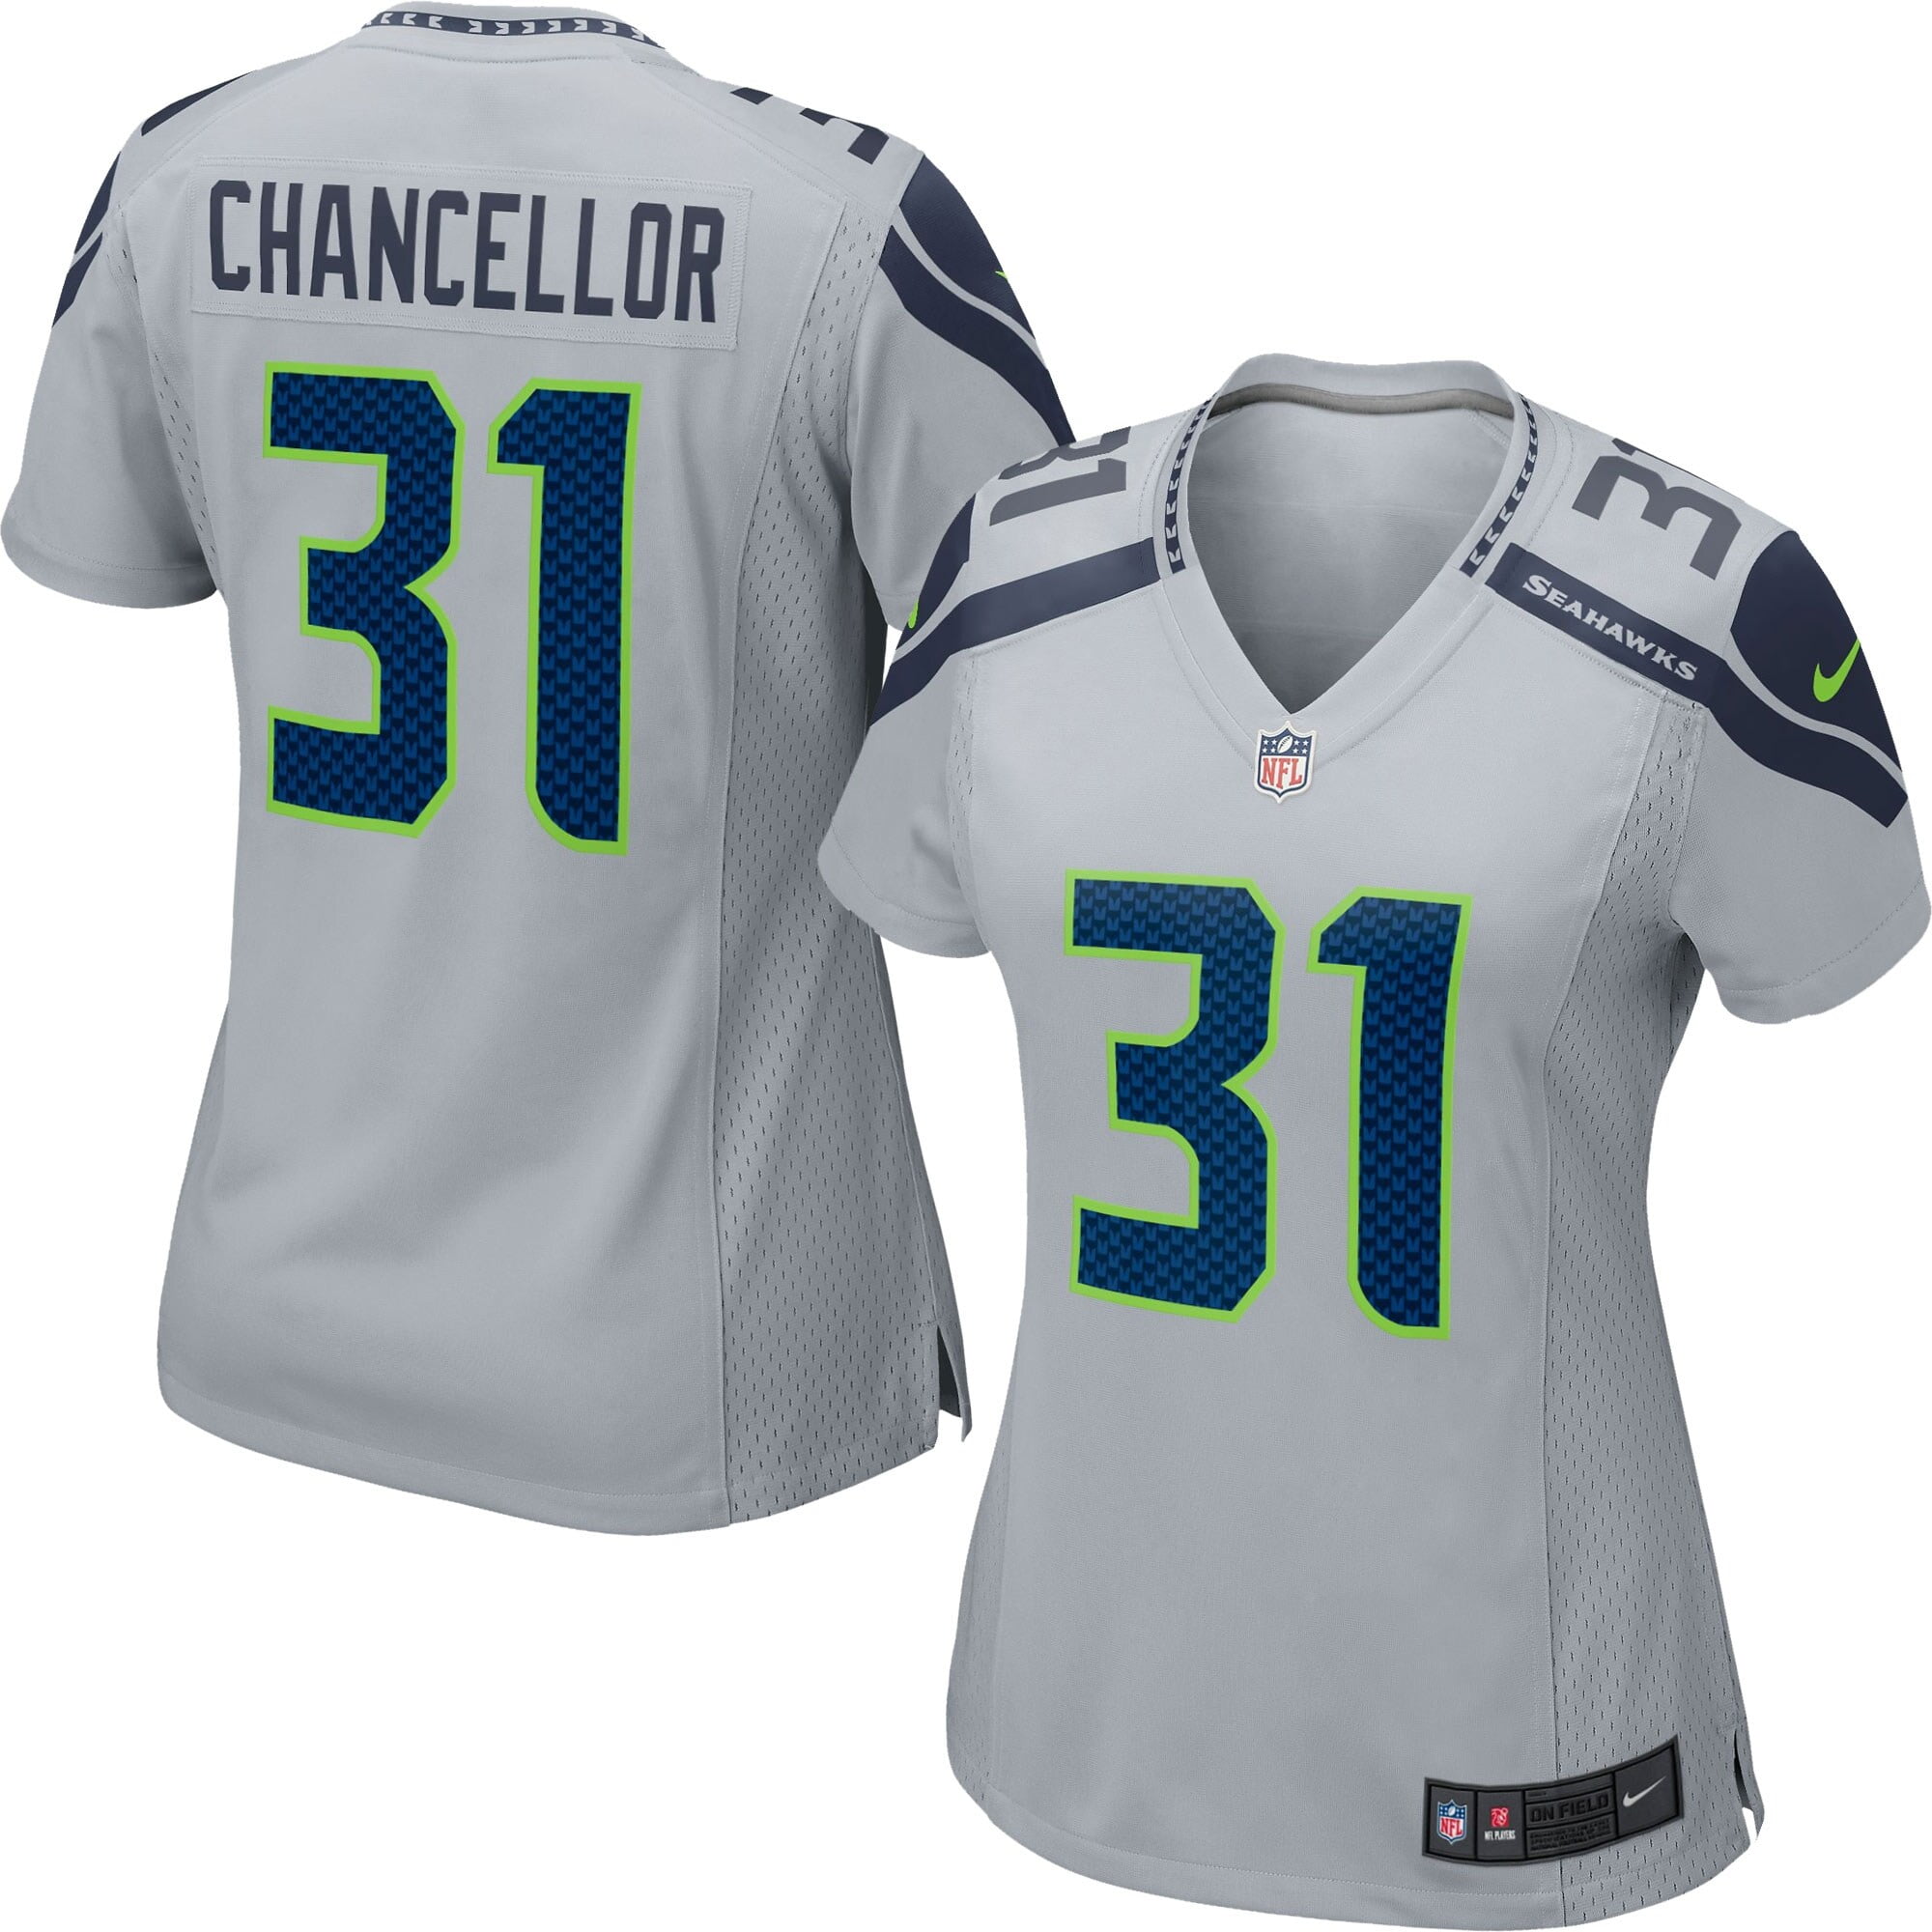 chancellor seahawks jersey